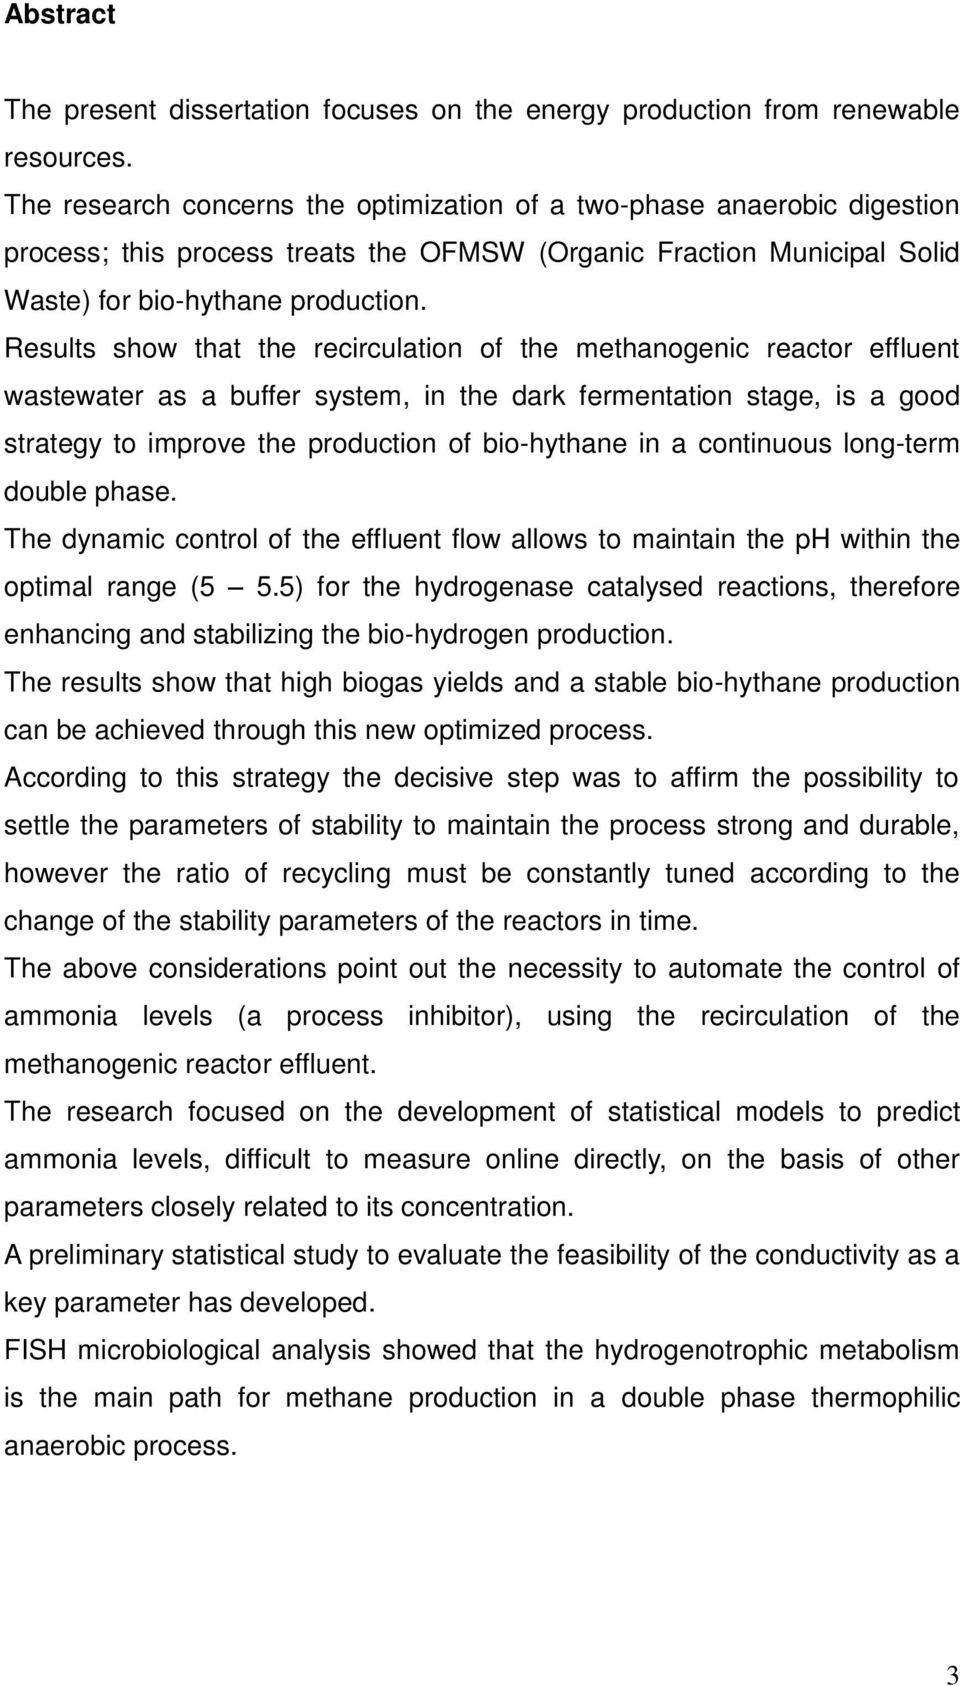 Results show that the recirculation of the methanogenic reactor effluent wastewater as a buffer system, in the dark fermentation stage, is a good strategy to improve the production of bio-hythane in